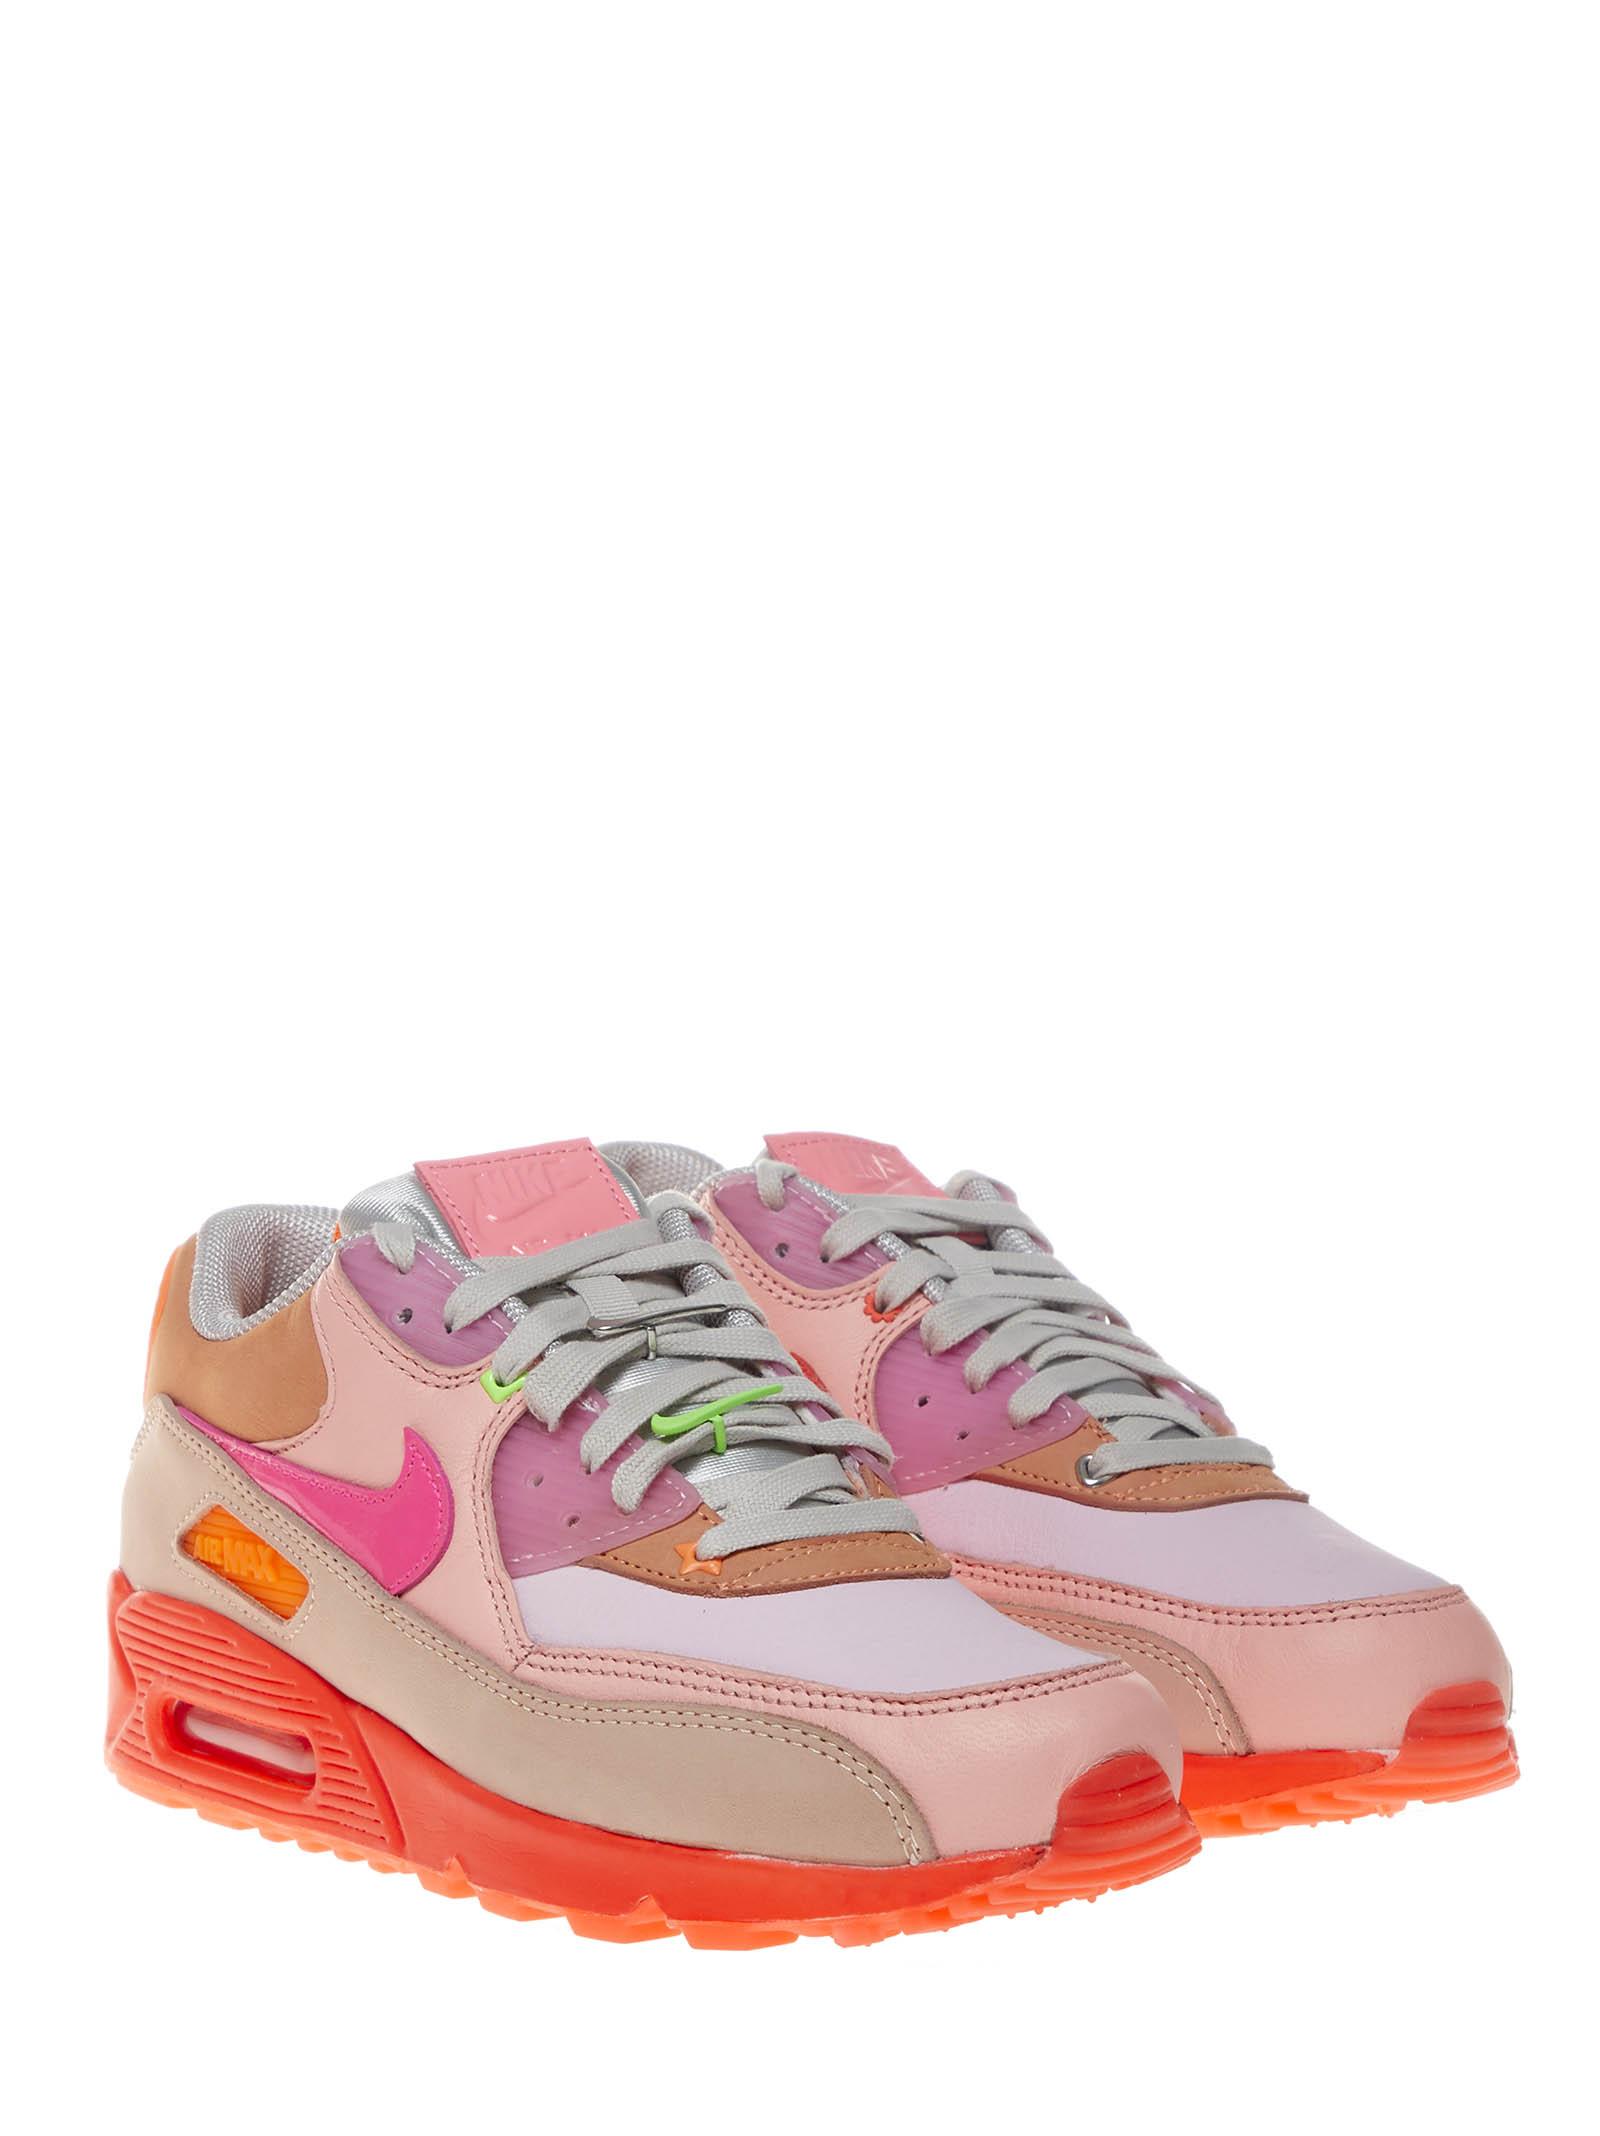 Pink And Orange Air Max 90 Sneakers With Layered And Air Technology. | Lyst